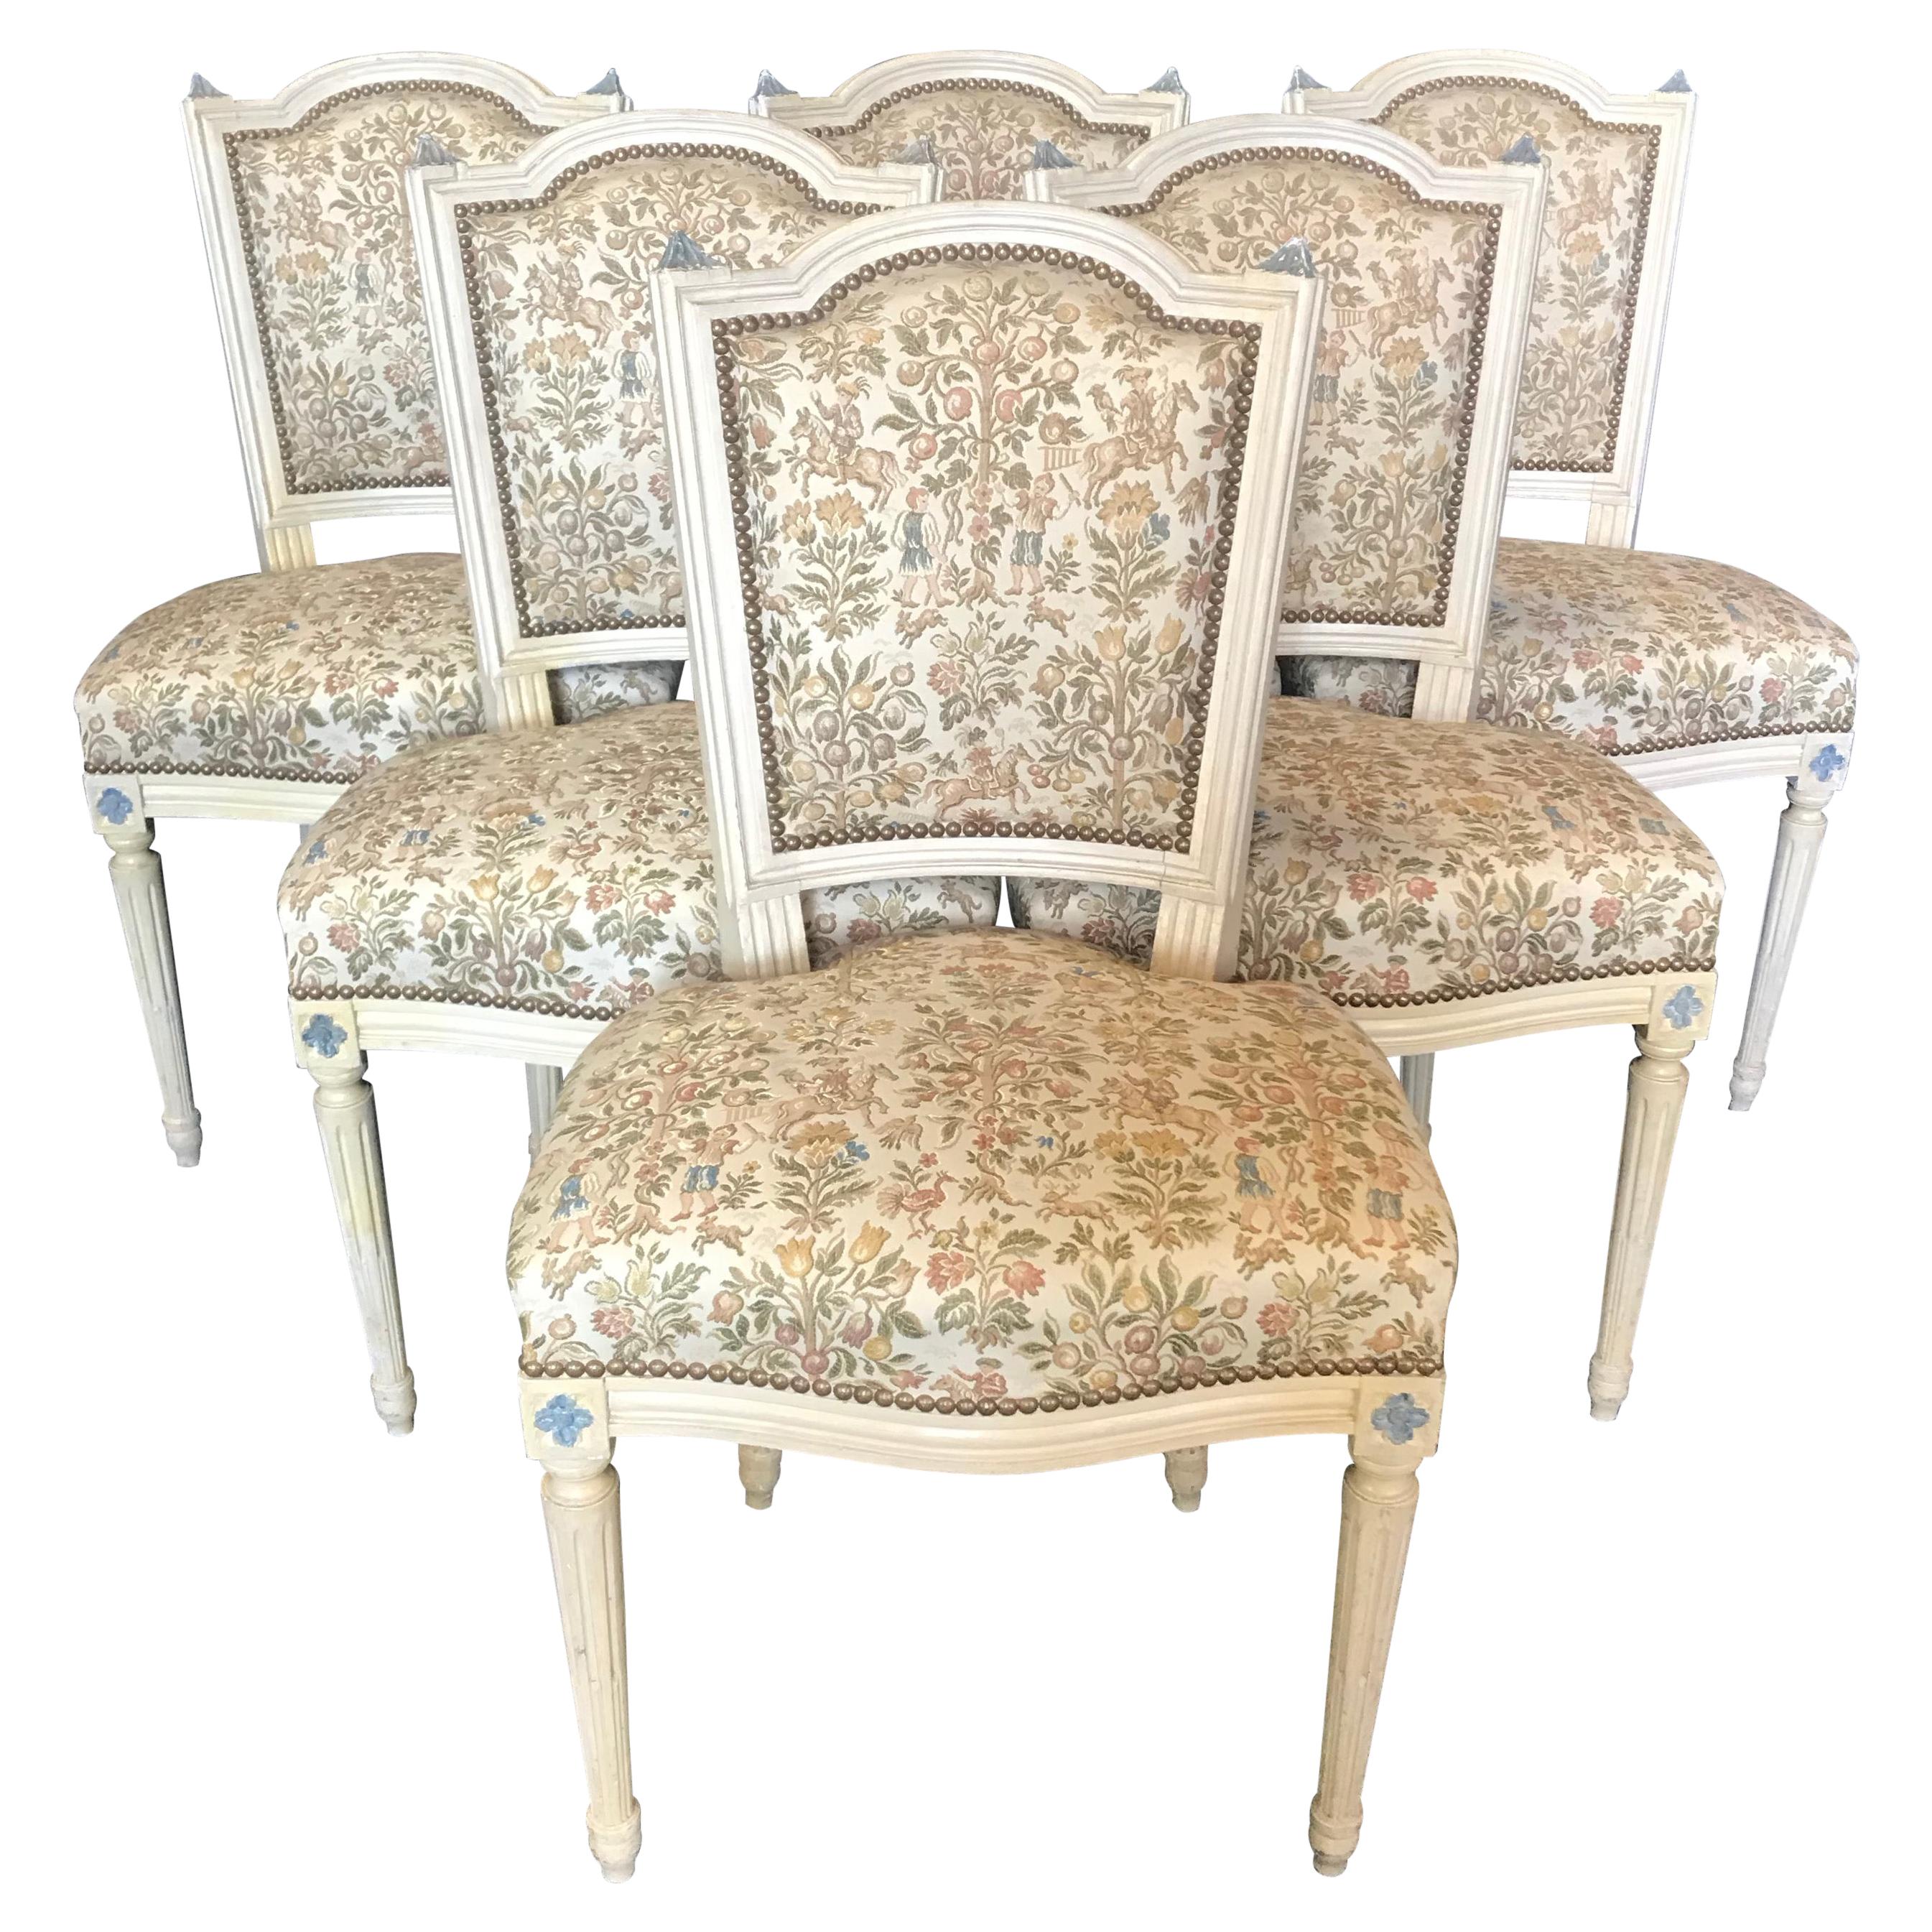 Elegant Set of Six Louis XVI Dining Chairs with Exquisite Tapestry